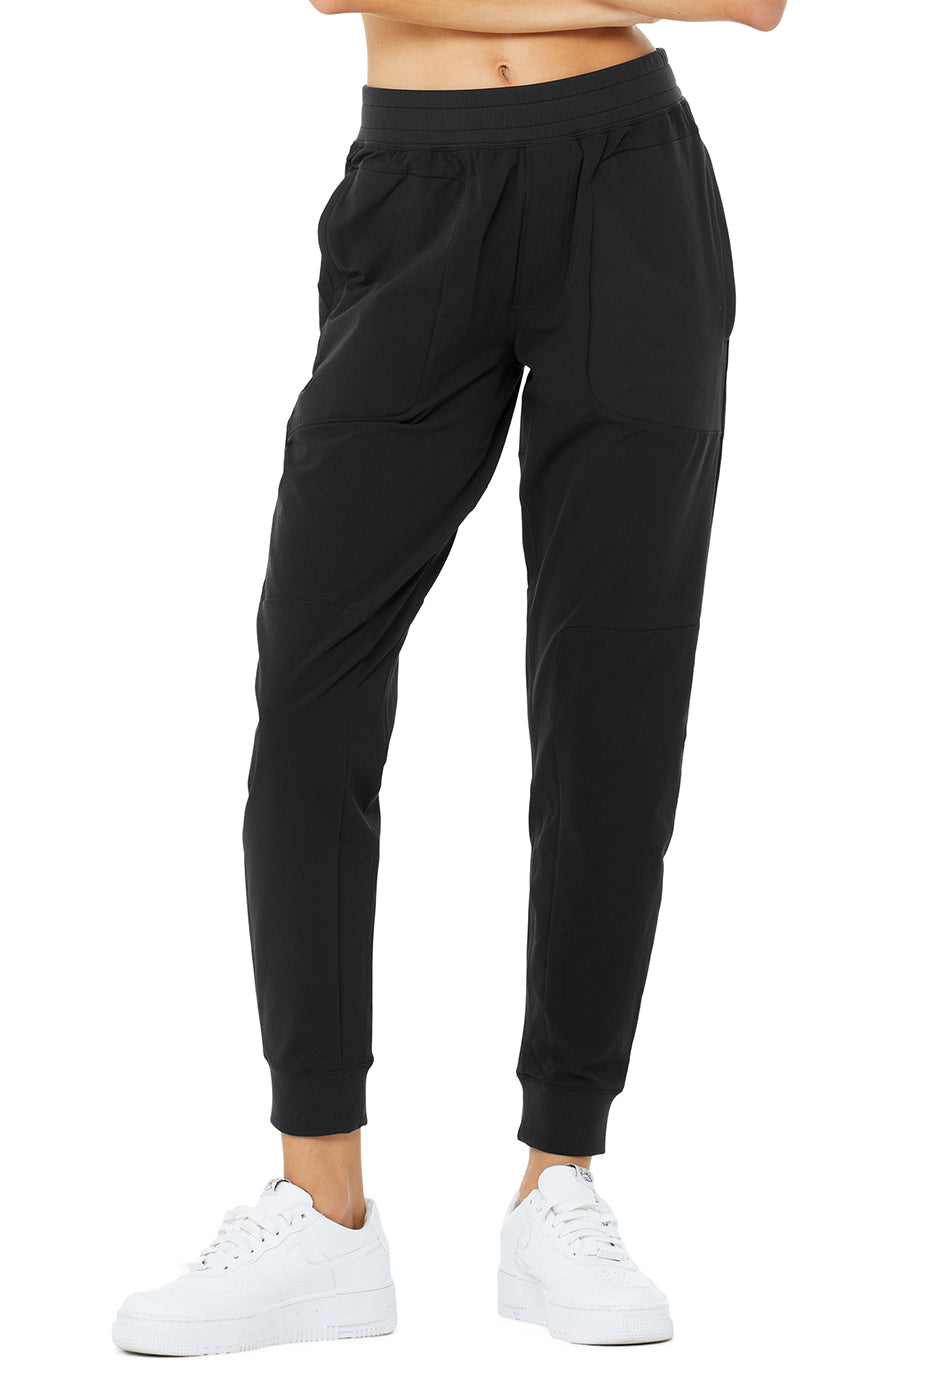 Casual Wear Ladies Black Yoga Pants, Size: 28 To 36 at Rs 270 in Alwar